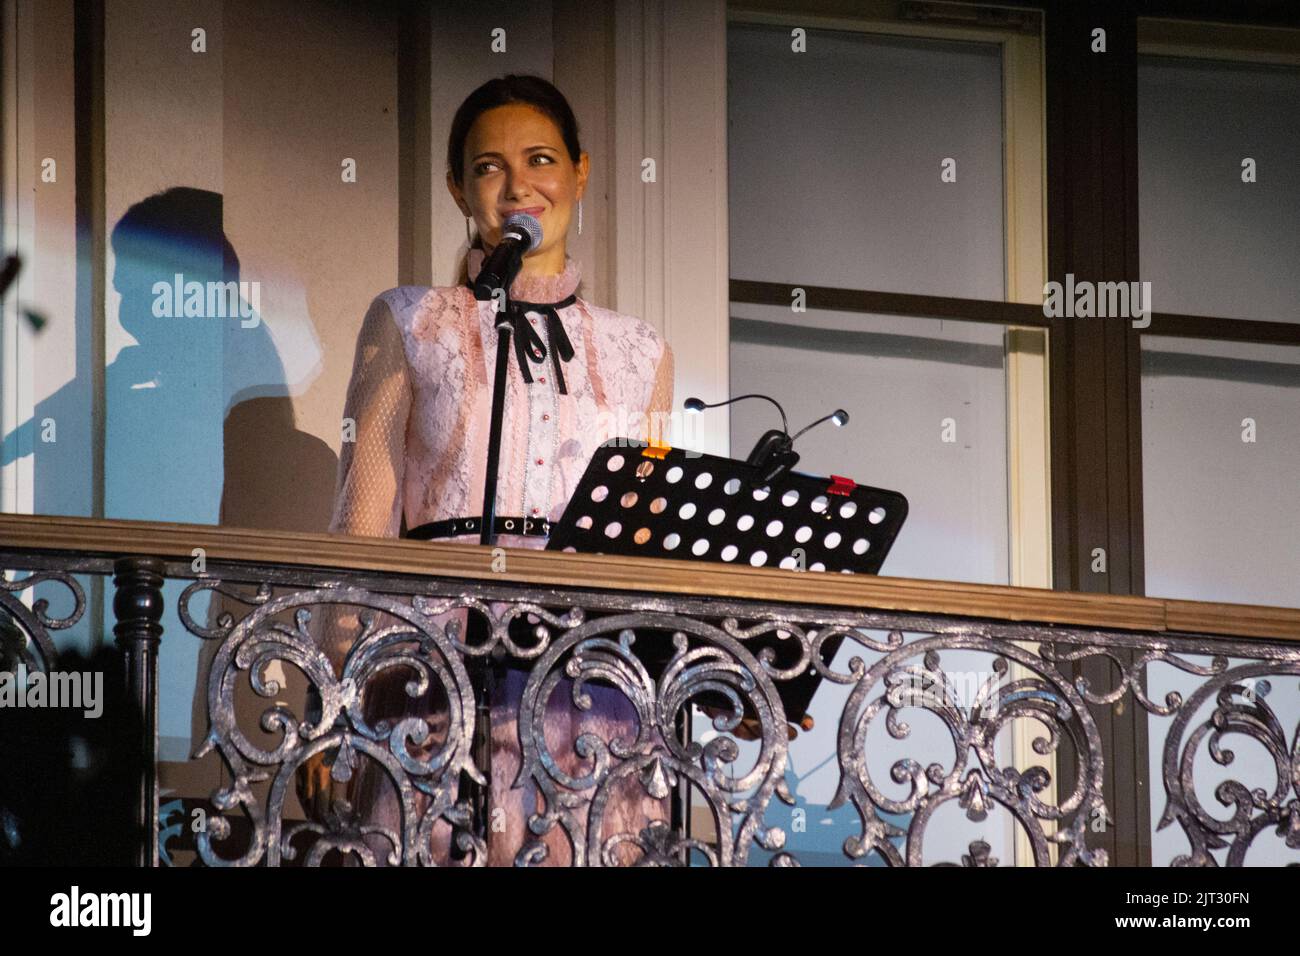 27. 08. 2022. Russia, Republic of Tatarstan, Kazan, City Hall. Russian theater, film and dubbing actress Ekaterina Klimova reads poetry during the 'Voice of Kazan' poetry performance. Stock Photo